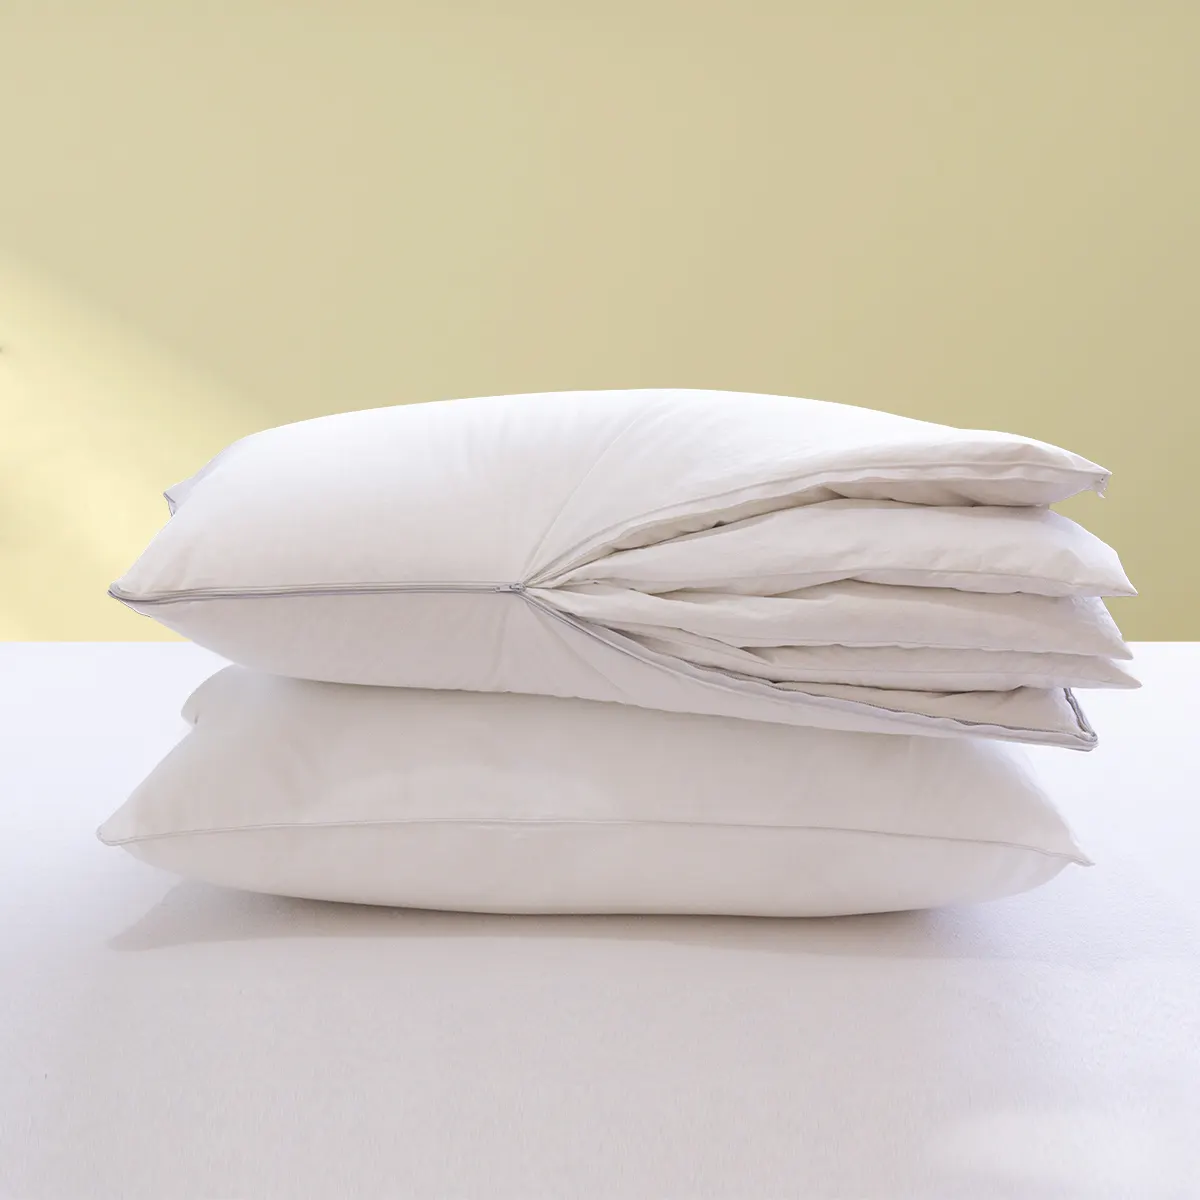 Down Pillows Sale UK Body Three Chamber Solid Color Throw Wholesale Organic White Feather Goose Pillow Height Adjustable